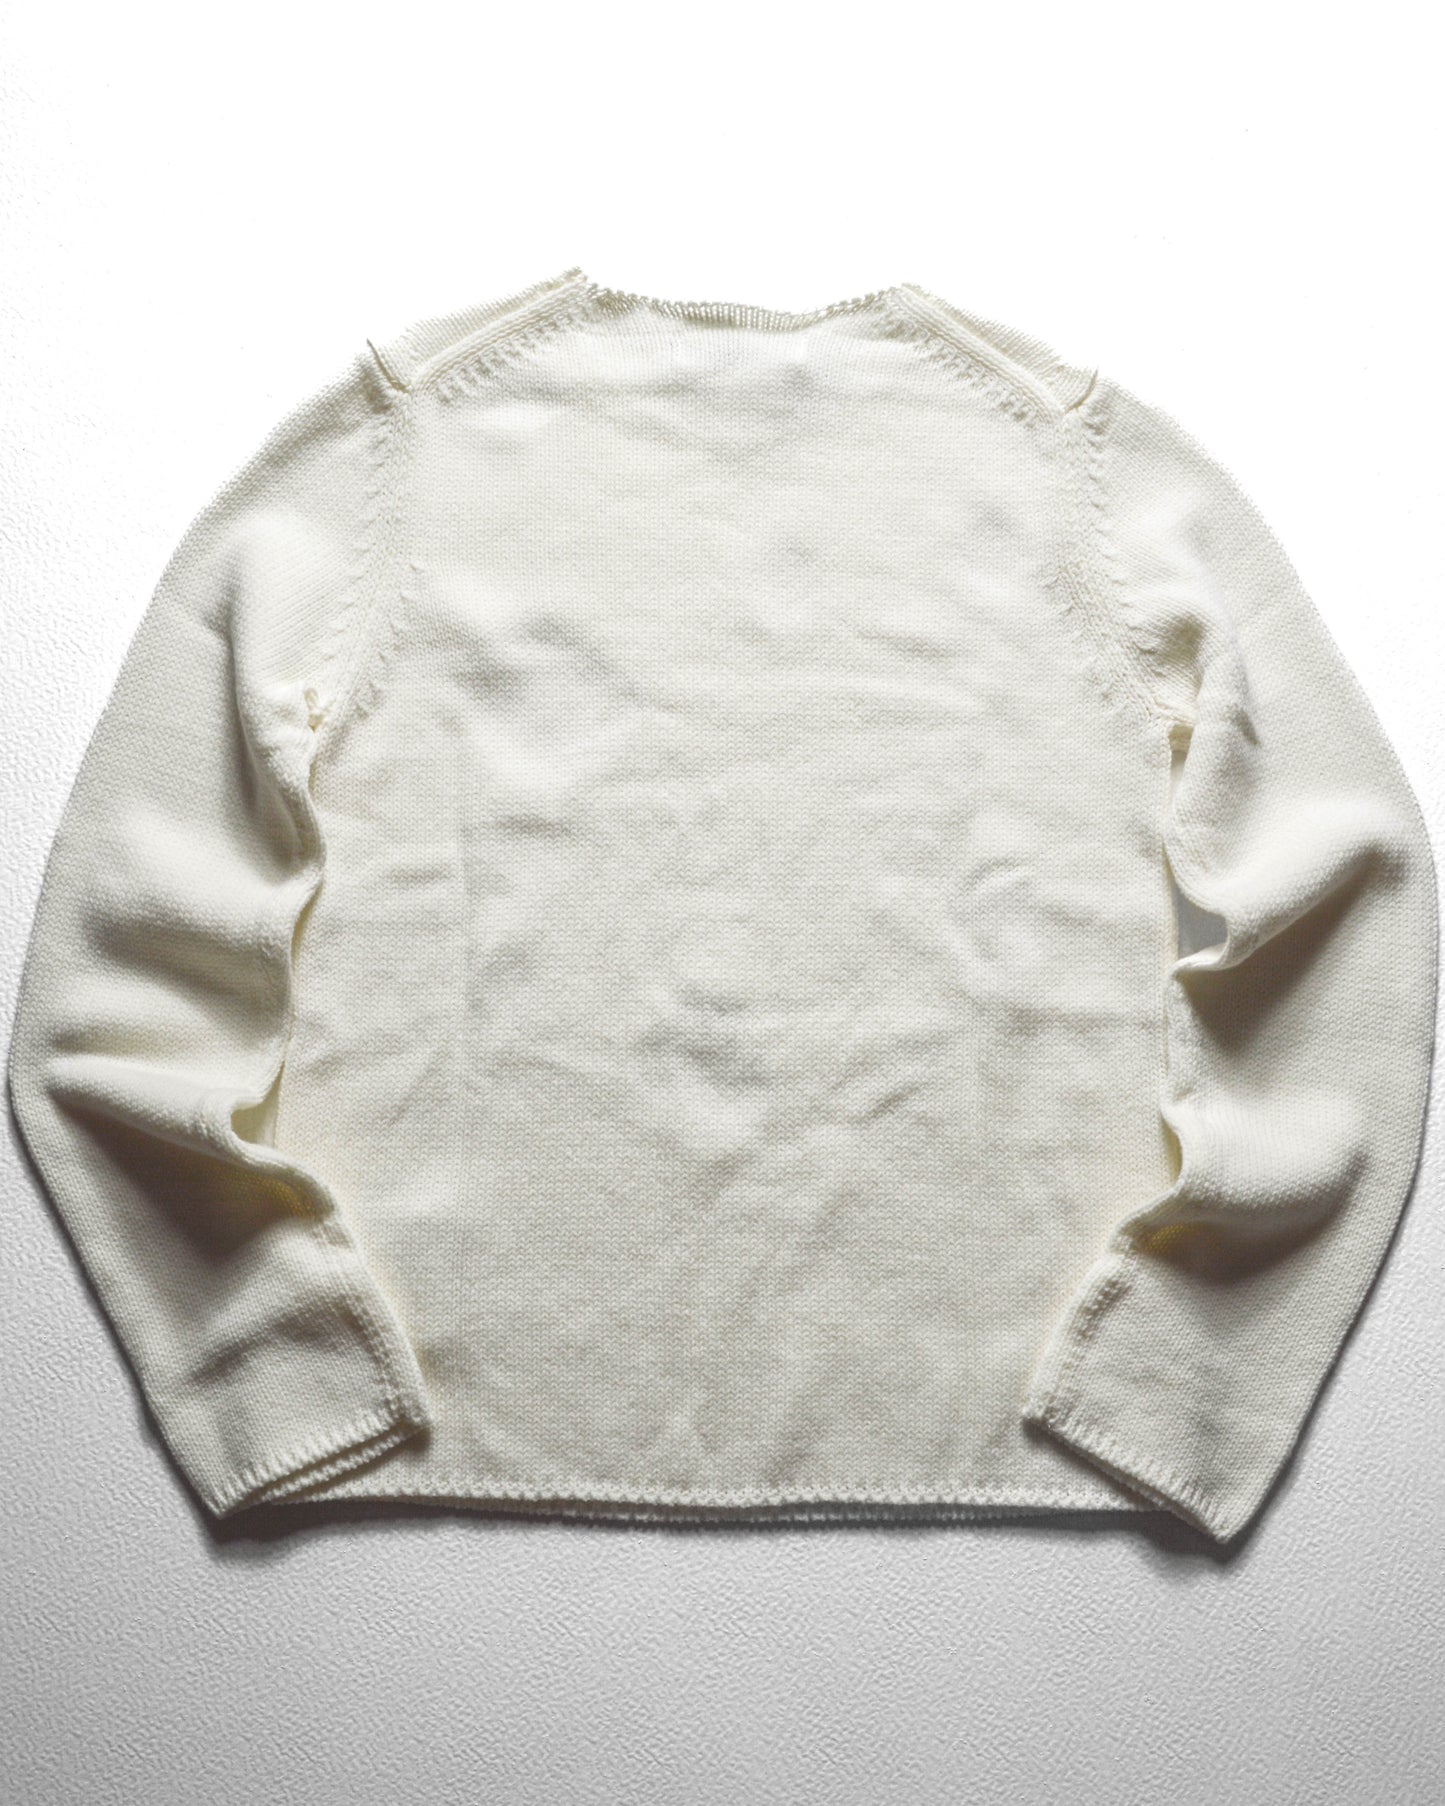 SS15 Cream / Off-white Holes Knit Jumper (XS~S)